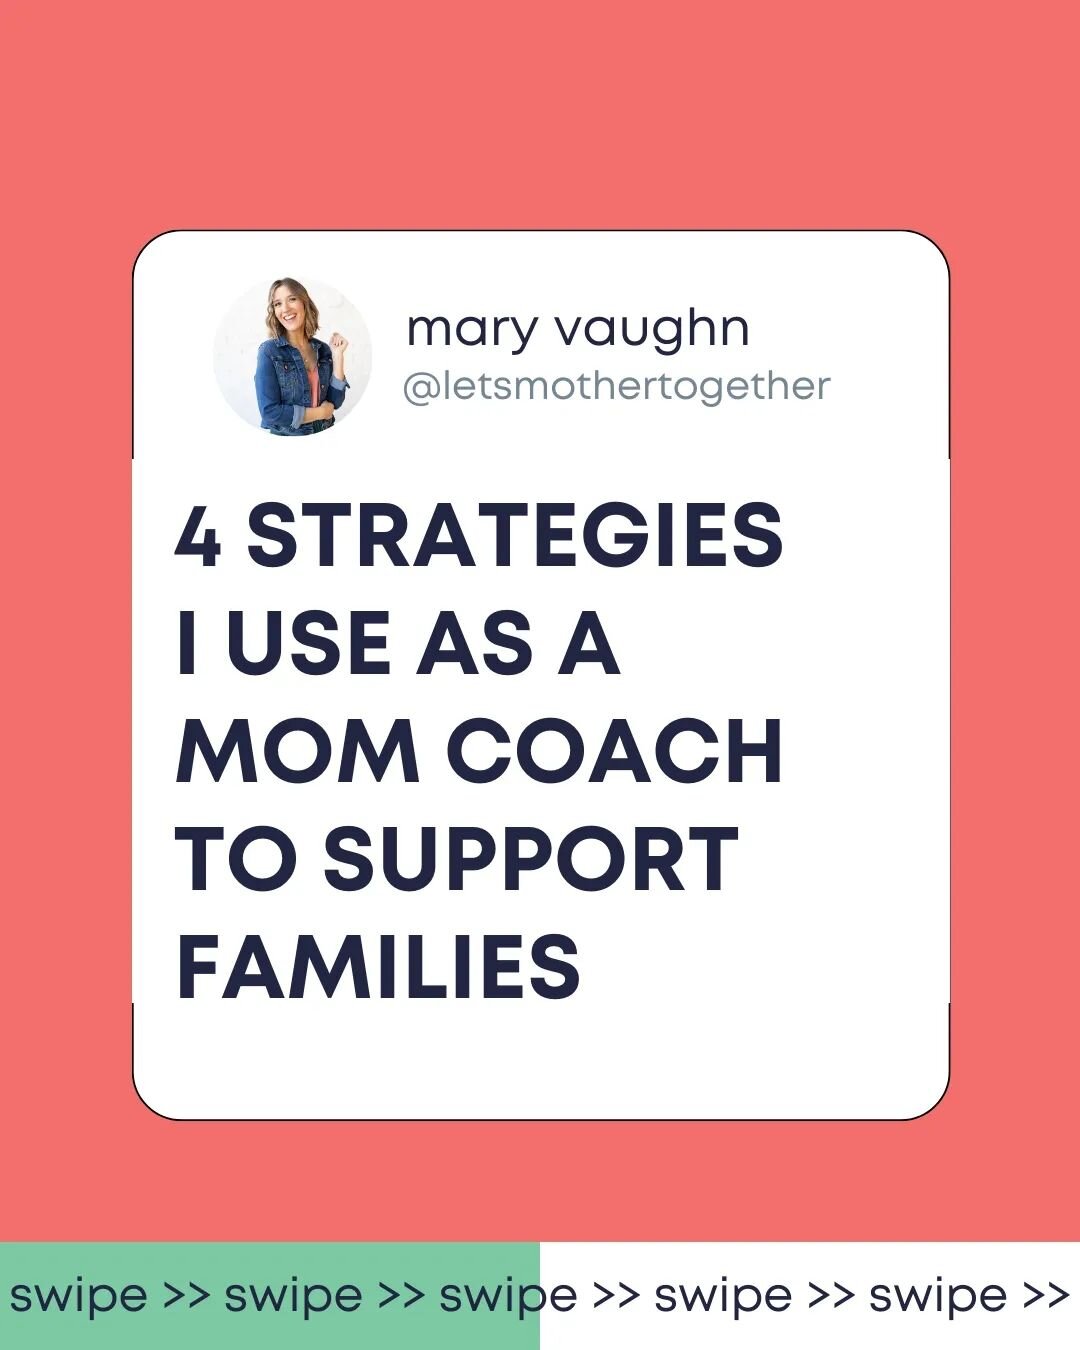 A glimpse of what coaching might involve 👀

💗 My specialty is helping moms establish the routines, habits, and systems that free up mental energy to focus on what matters: your family.

DM &quot;coaching&quot; to take that first step toward being y